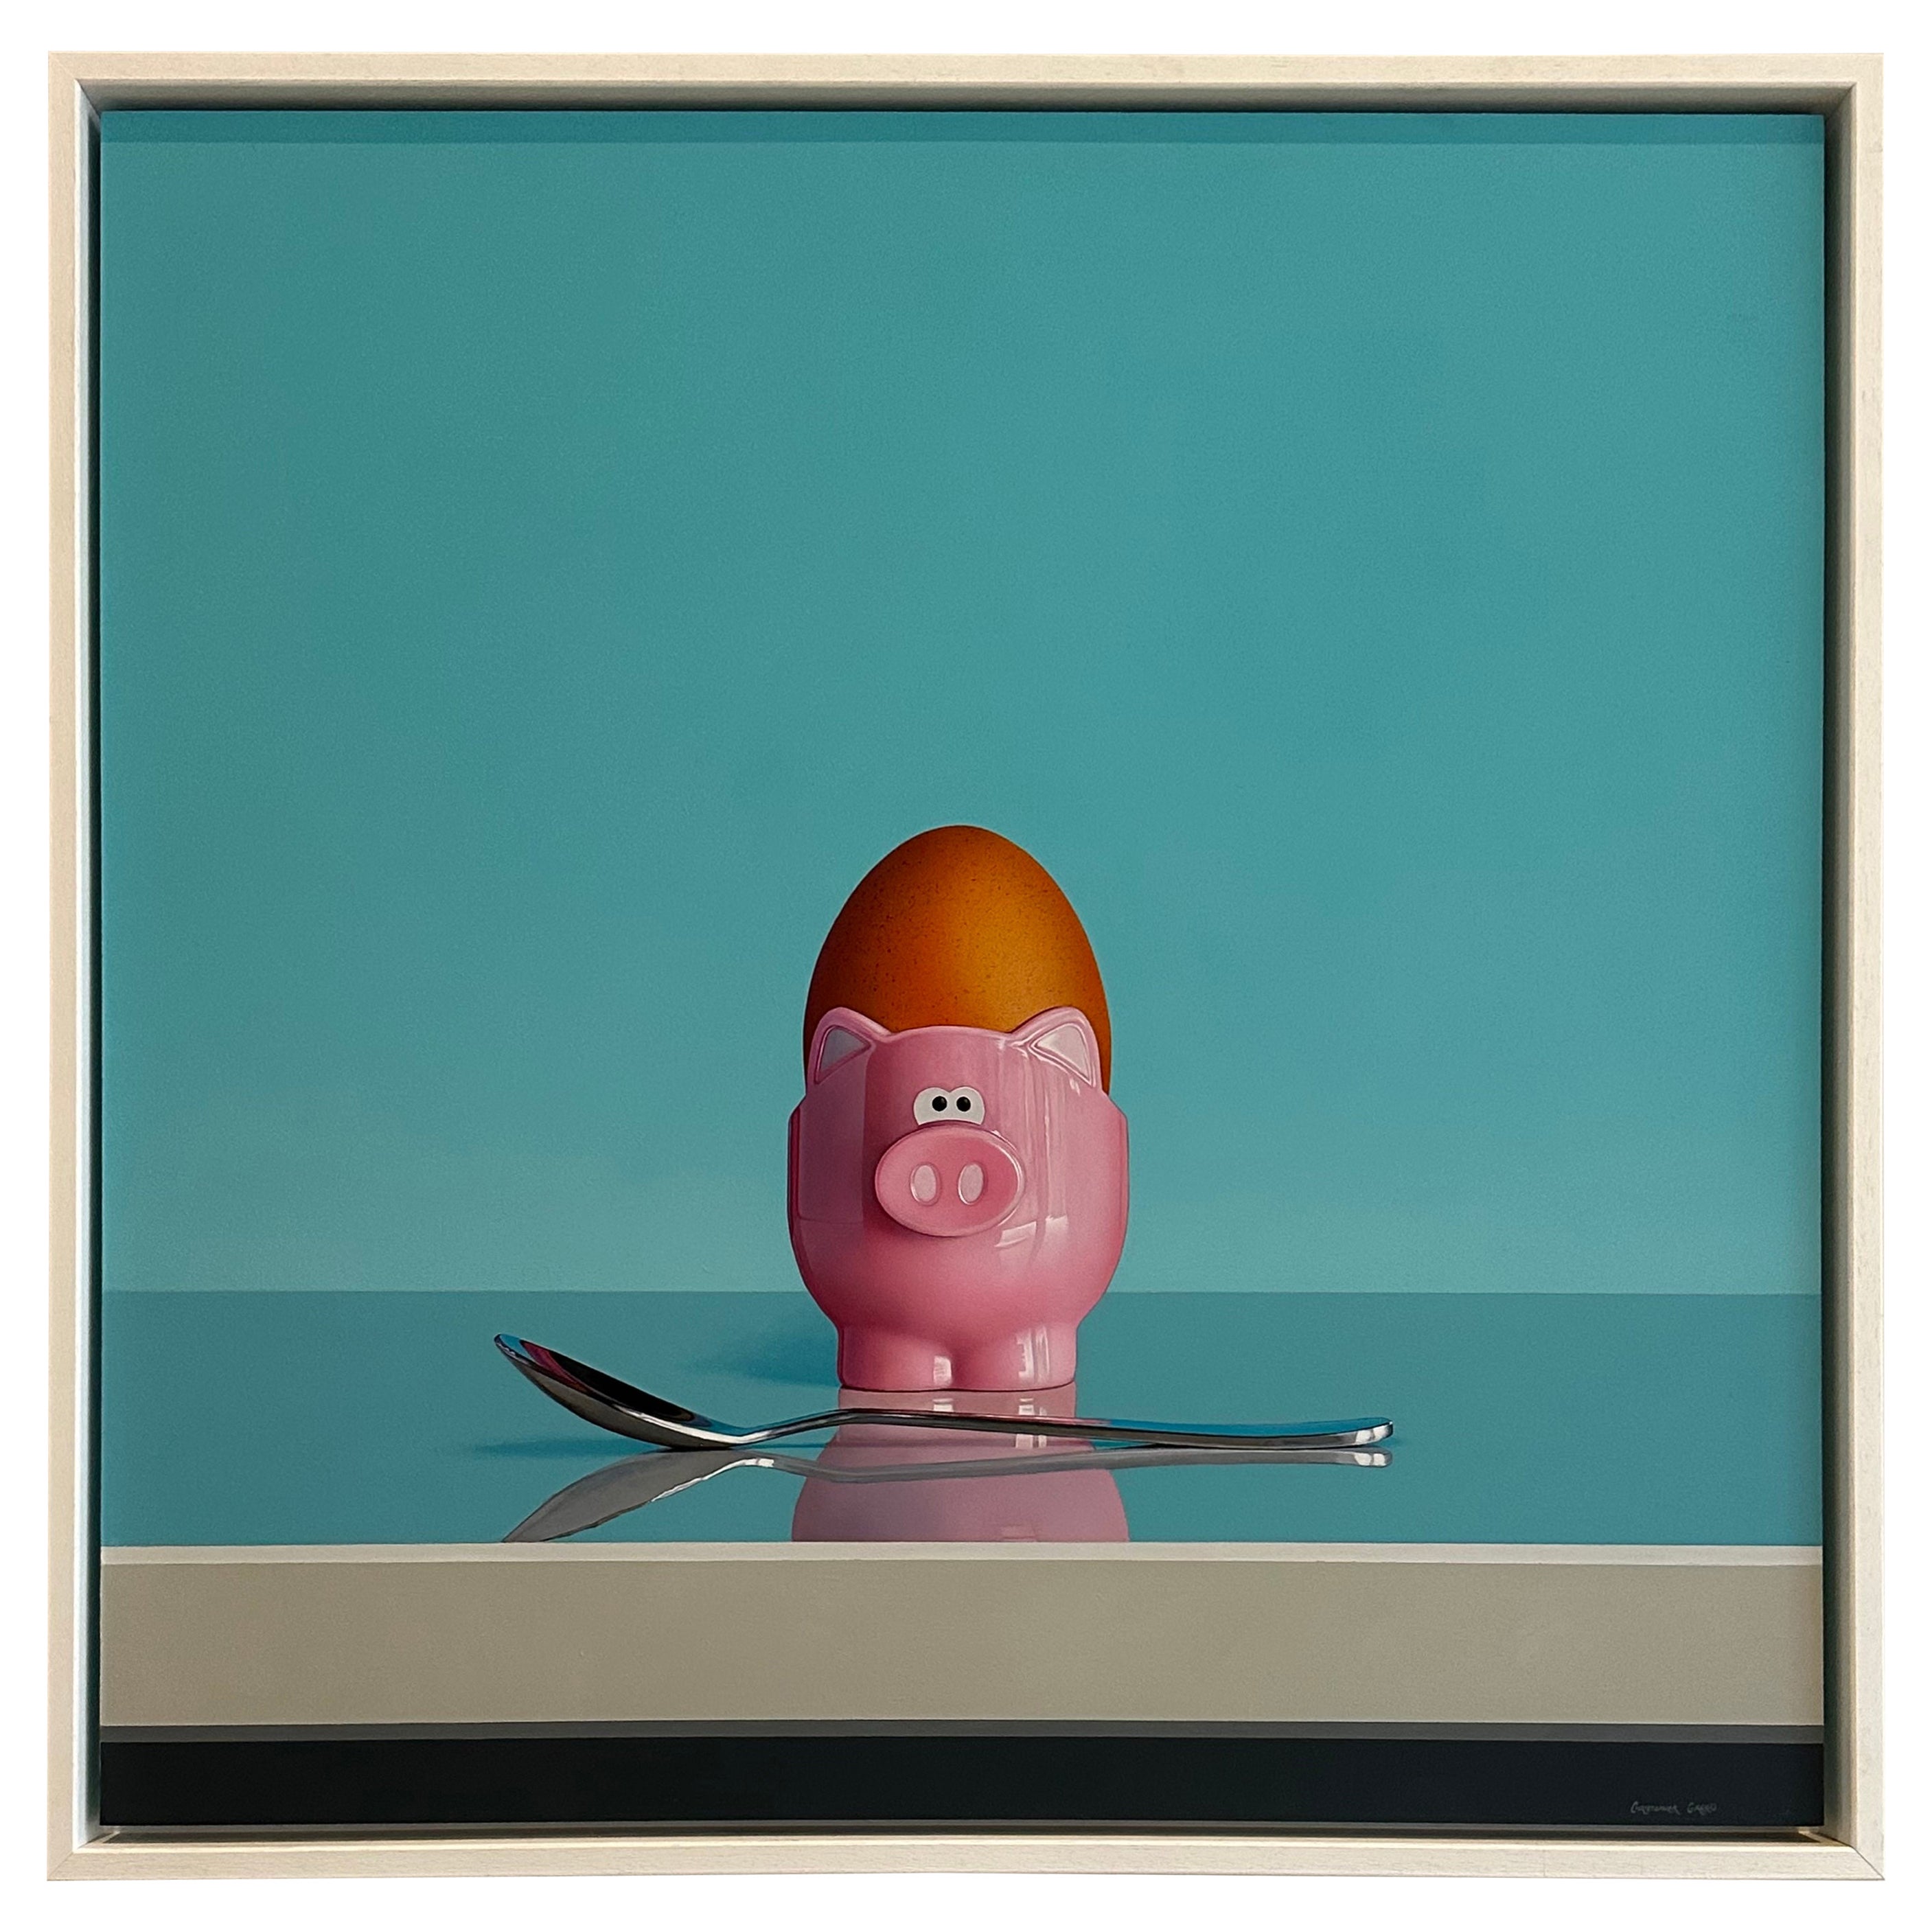 A square painting that will bring an immediate smile to your face of an egg cup designed in the shape of a pink pig with an egg inside and a silver polished spoon placed in front. The pig is from the Joie Egg Cup range of products. I have been